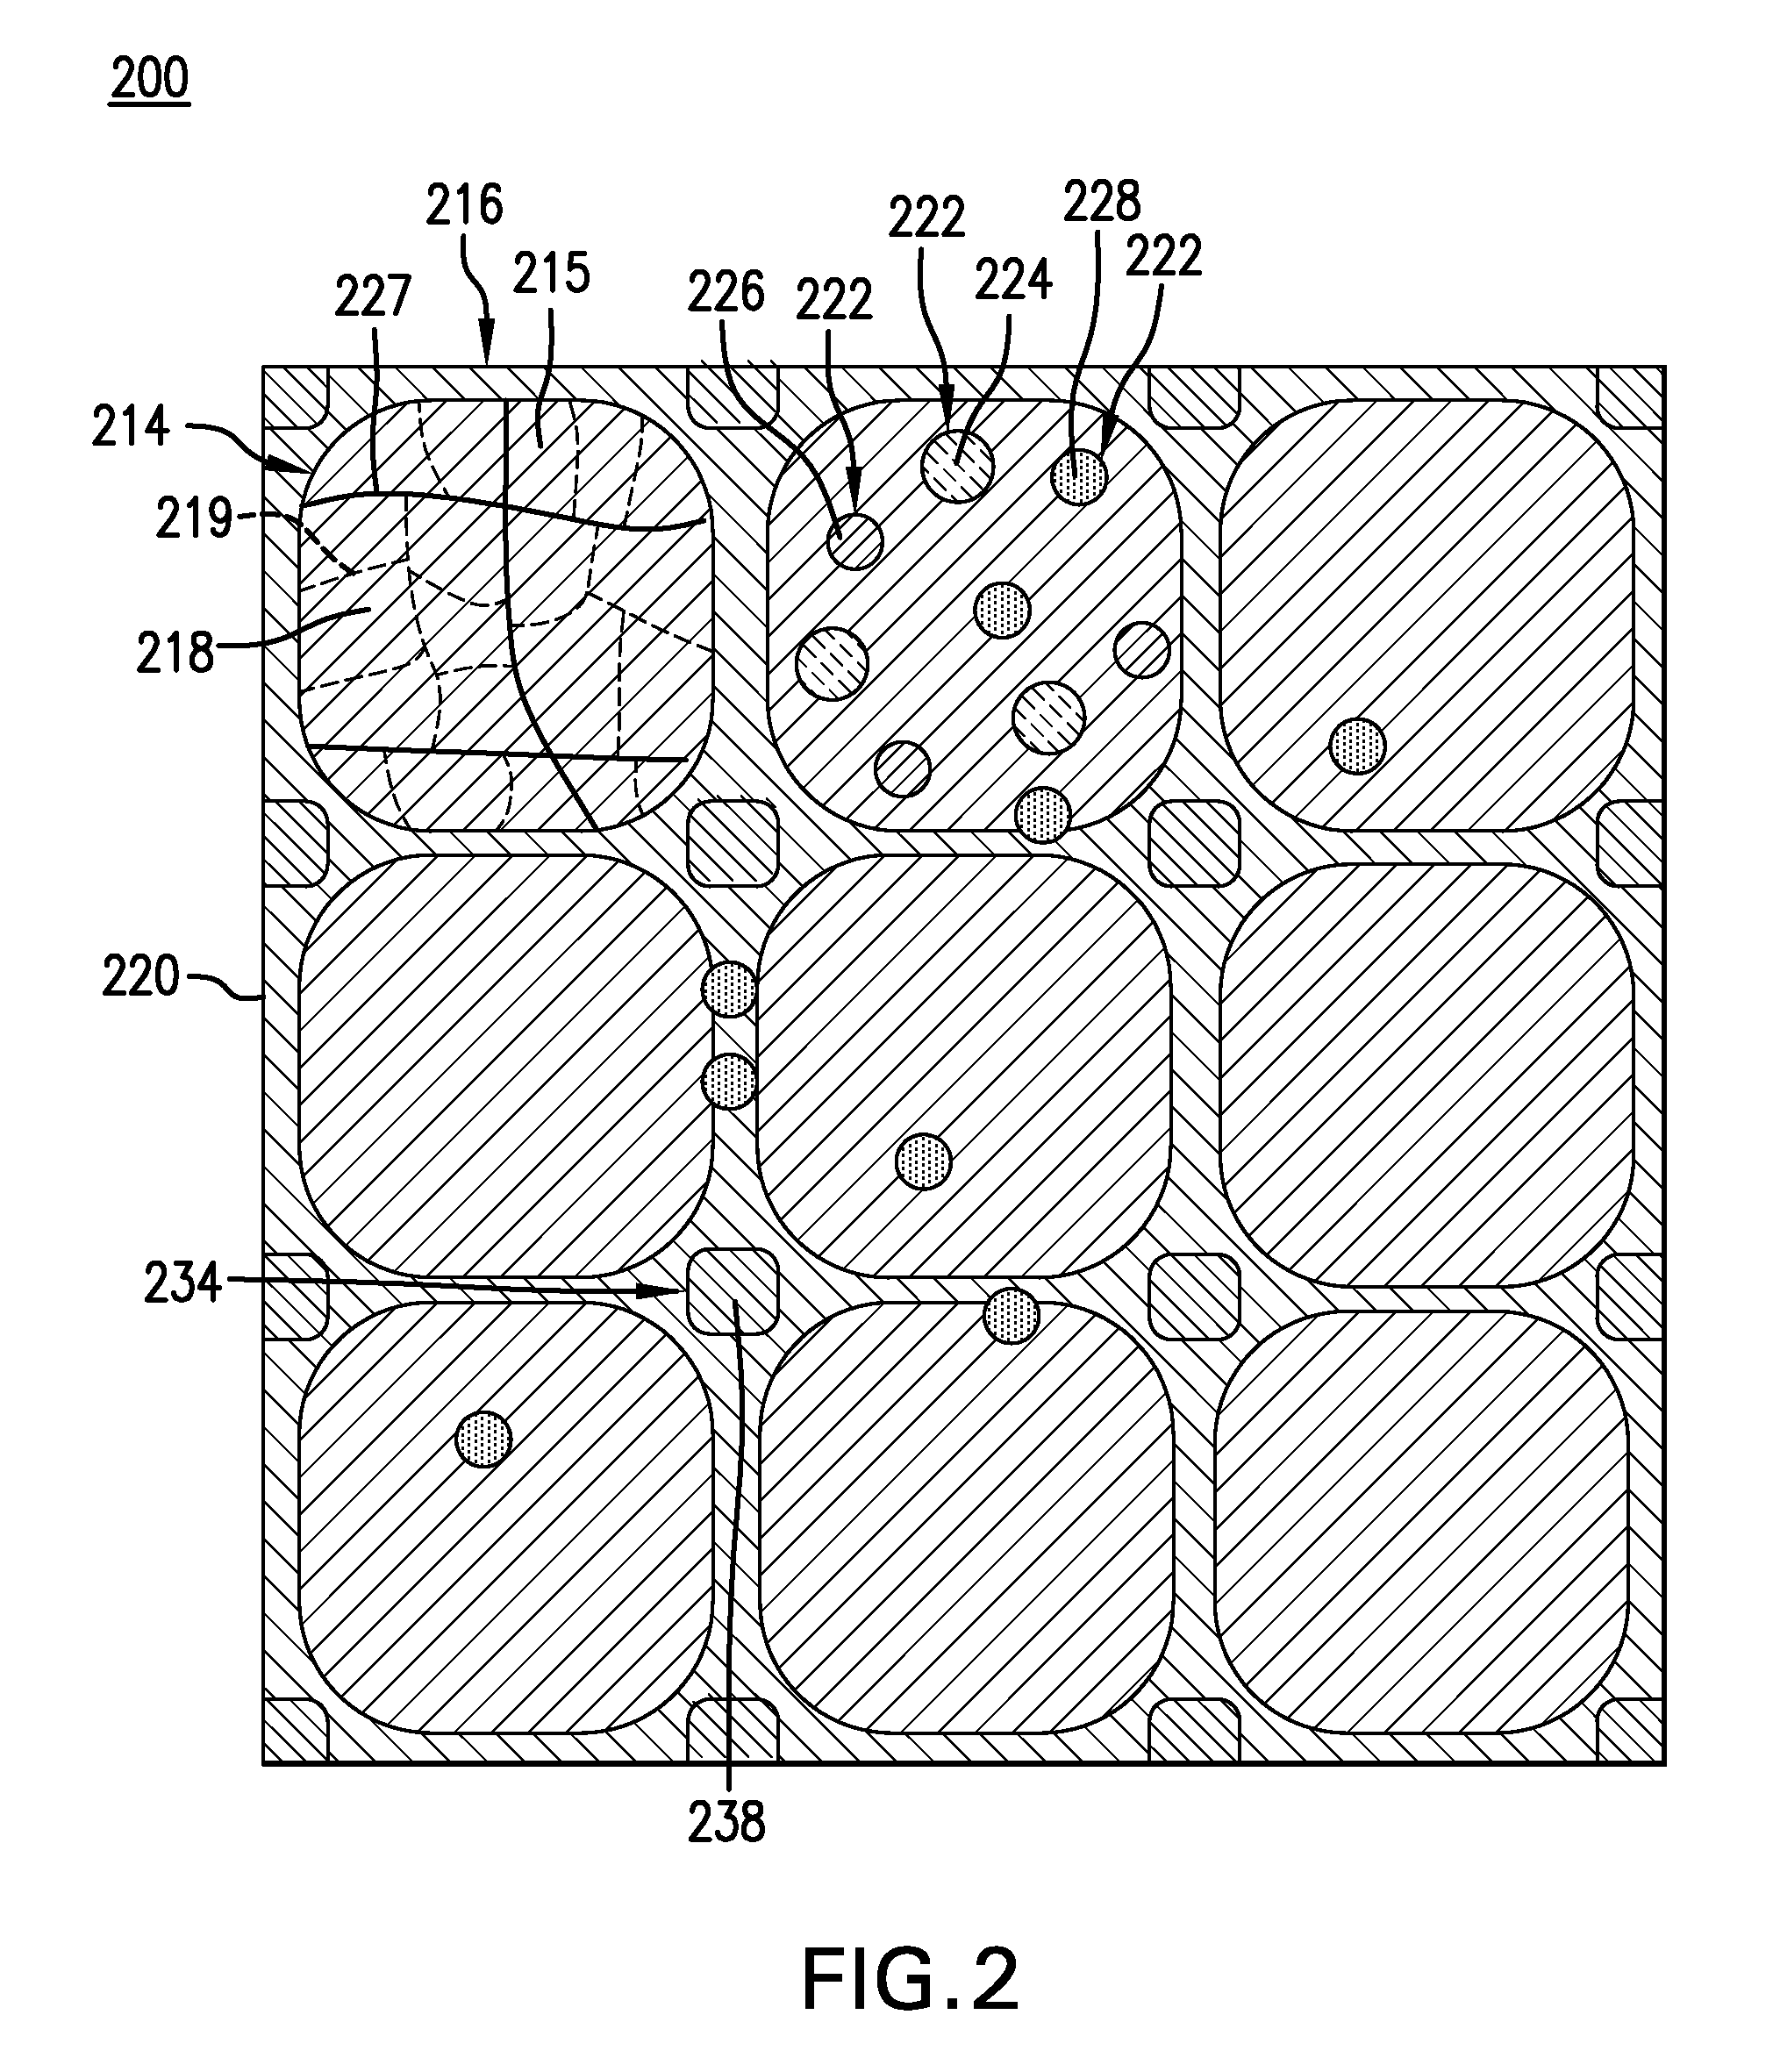 Disintegrable tubular anchoring system and method of using the same